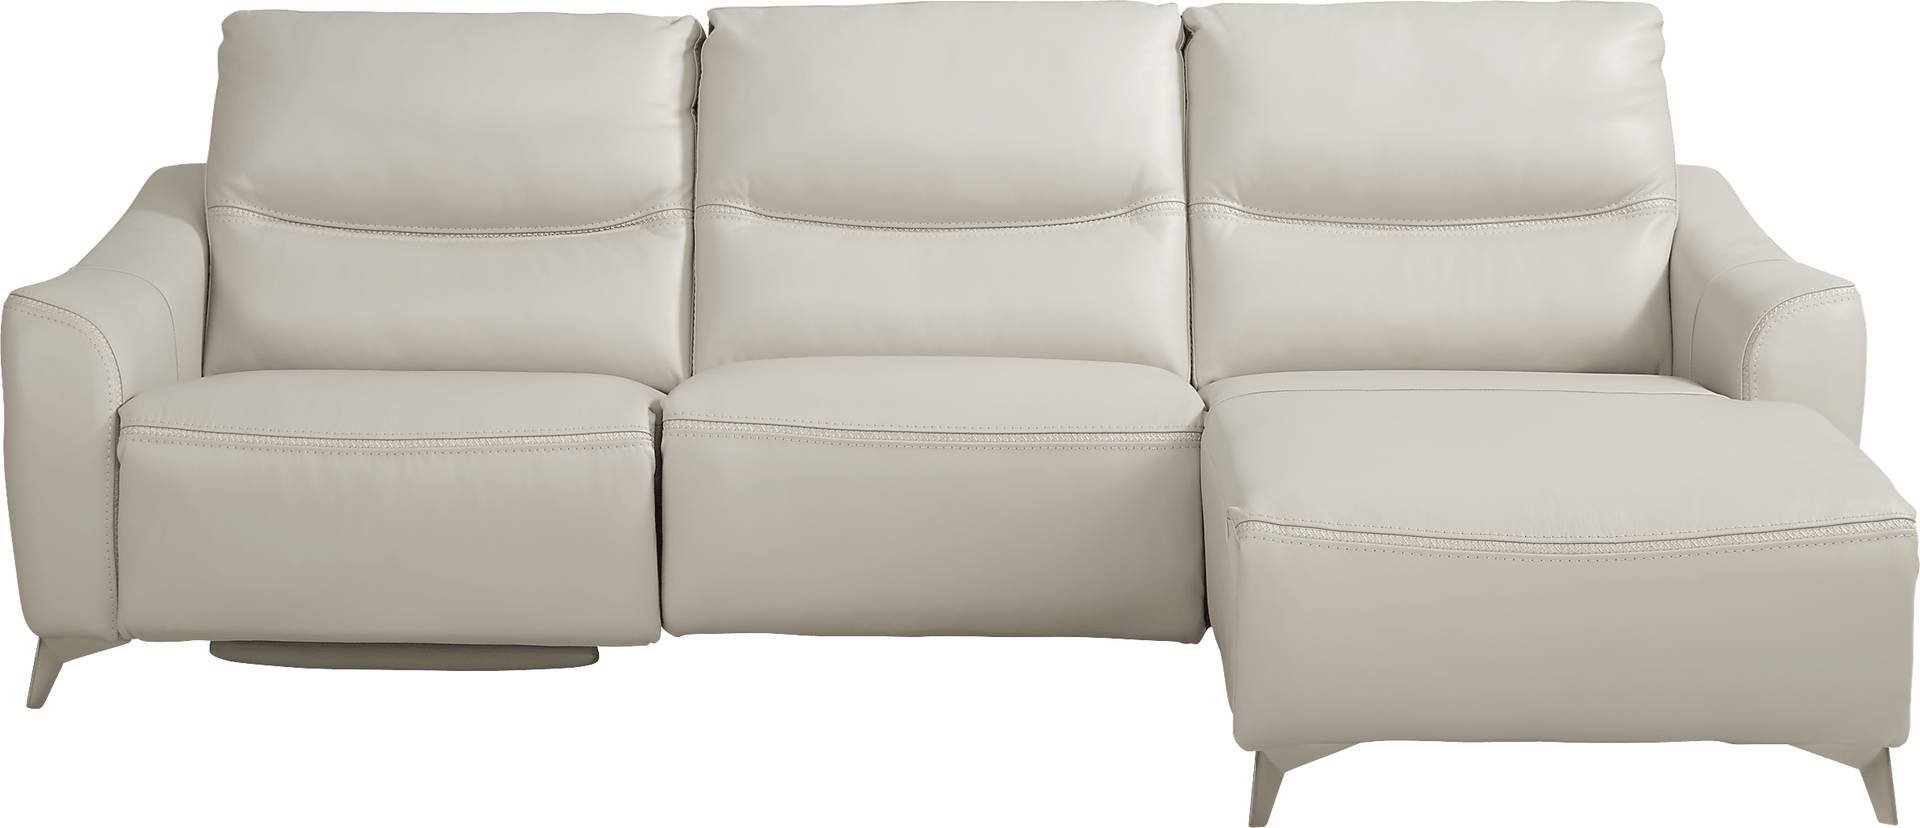 3 pc right arm chaise power sectional